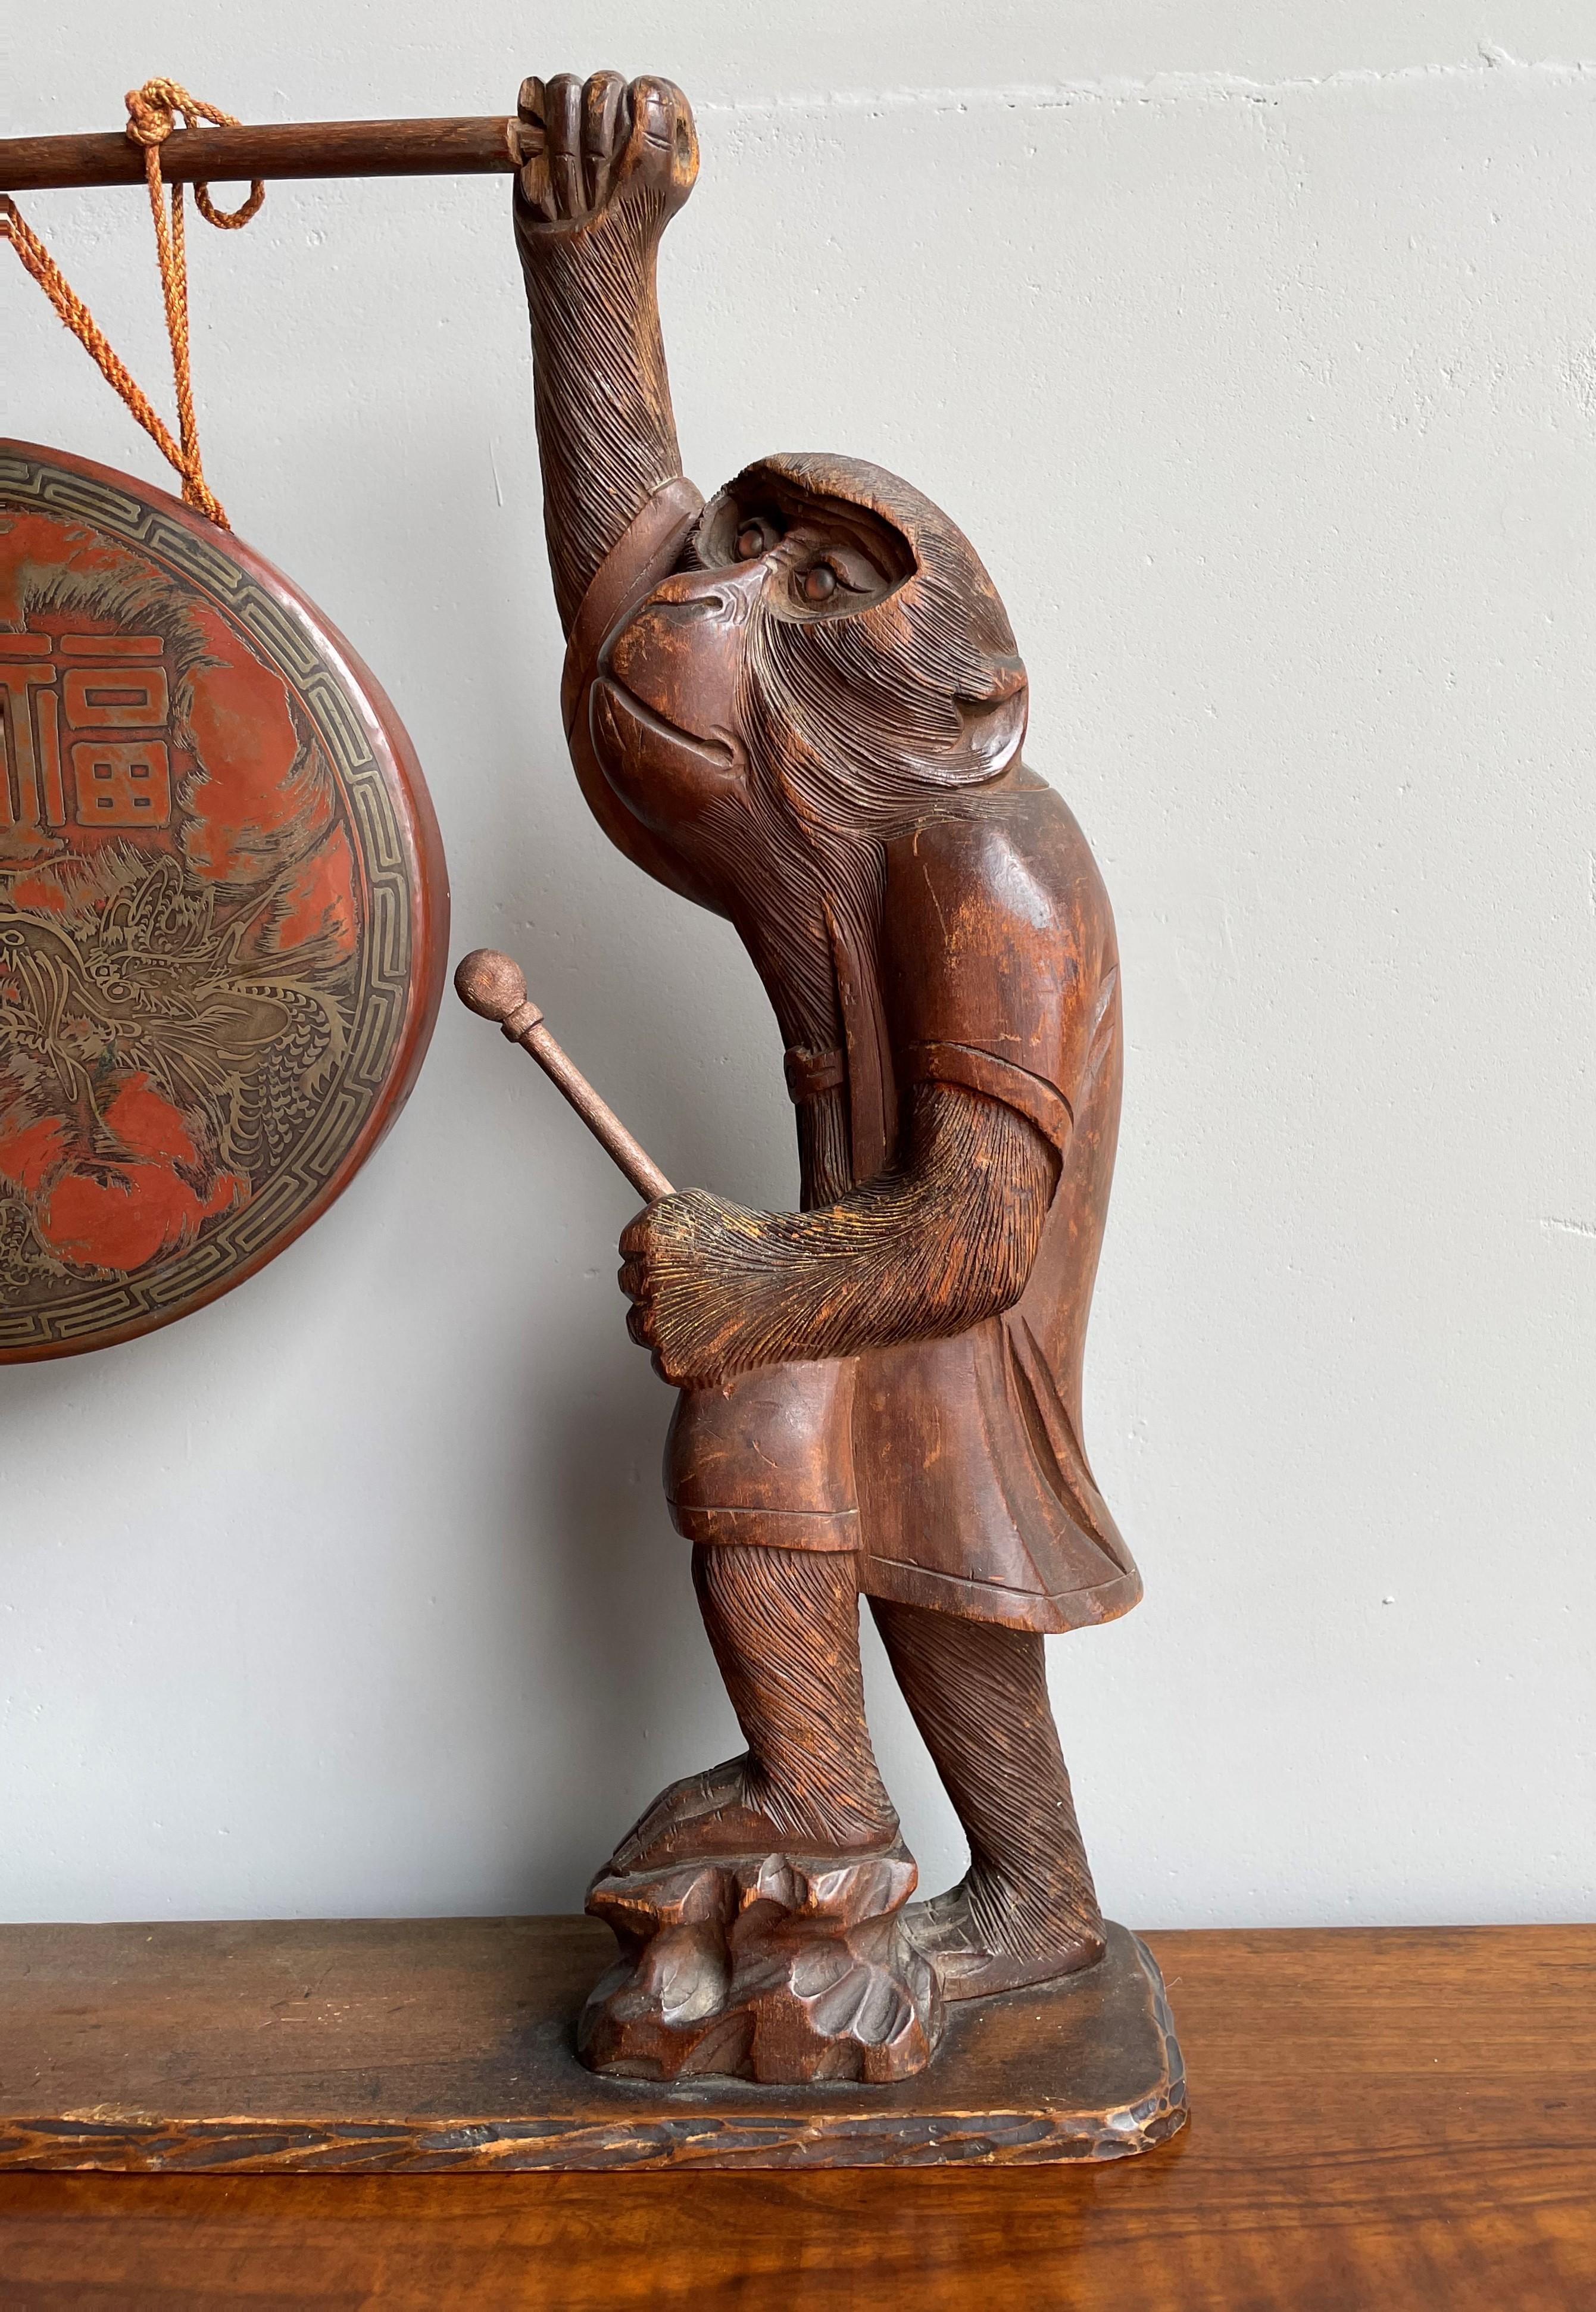 20th Century Antique Chinese Table Gong Held Up by Two Hand Carved Wooden Monkey Sculptures